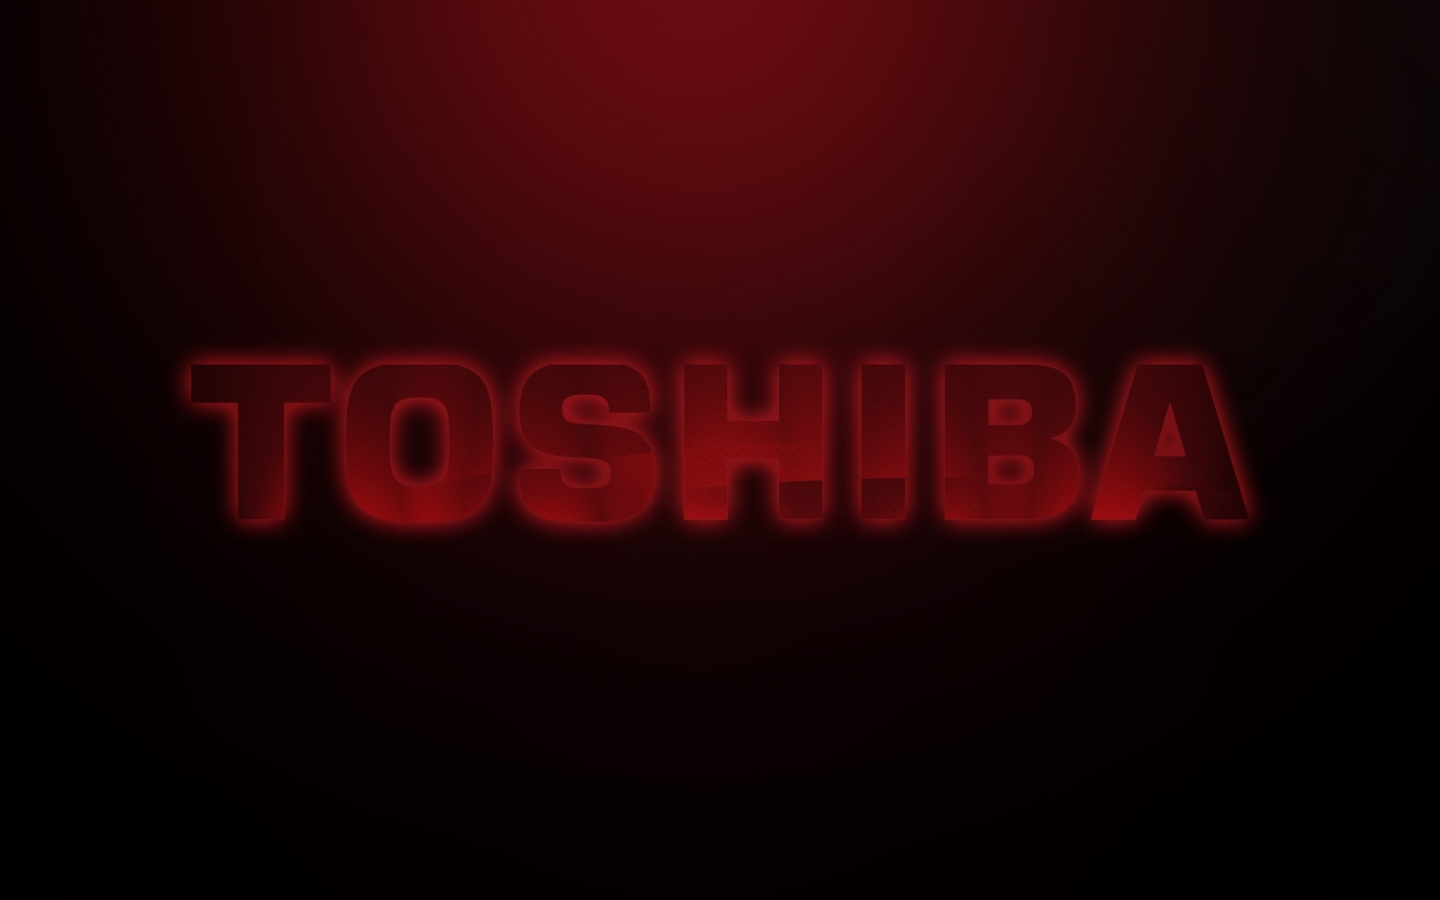 Toshiba red style for 1440 x 900 widescreen resolution